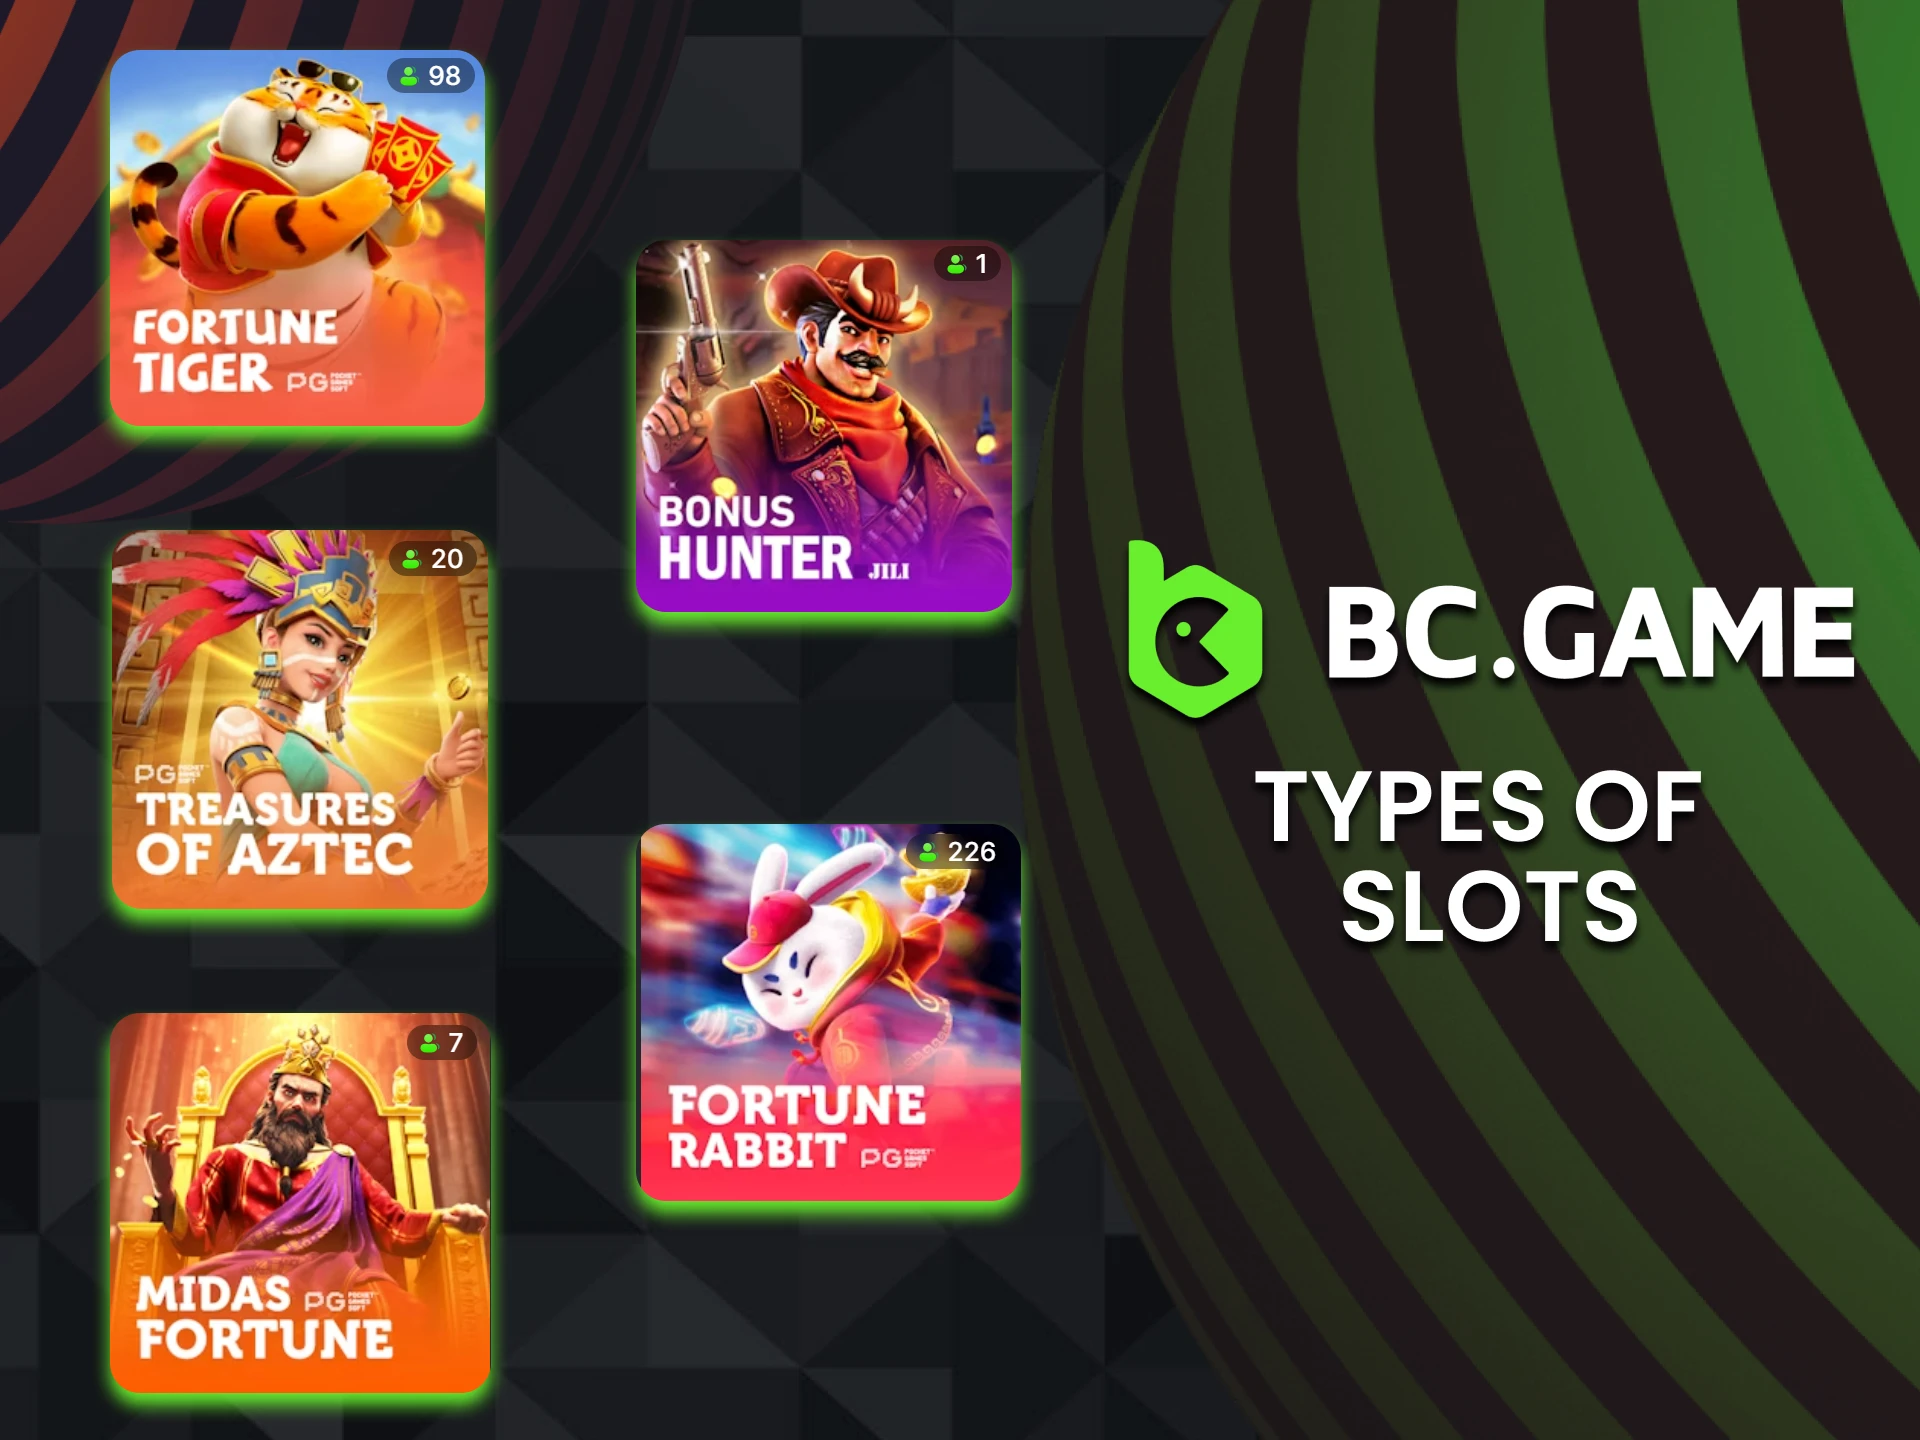 There are many popular slots available at BC Game Casino.